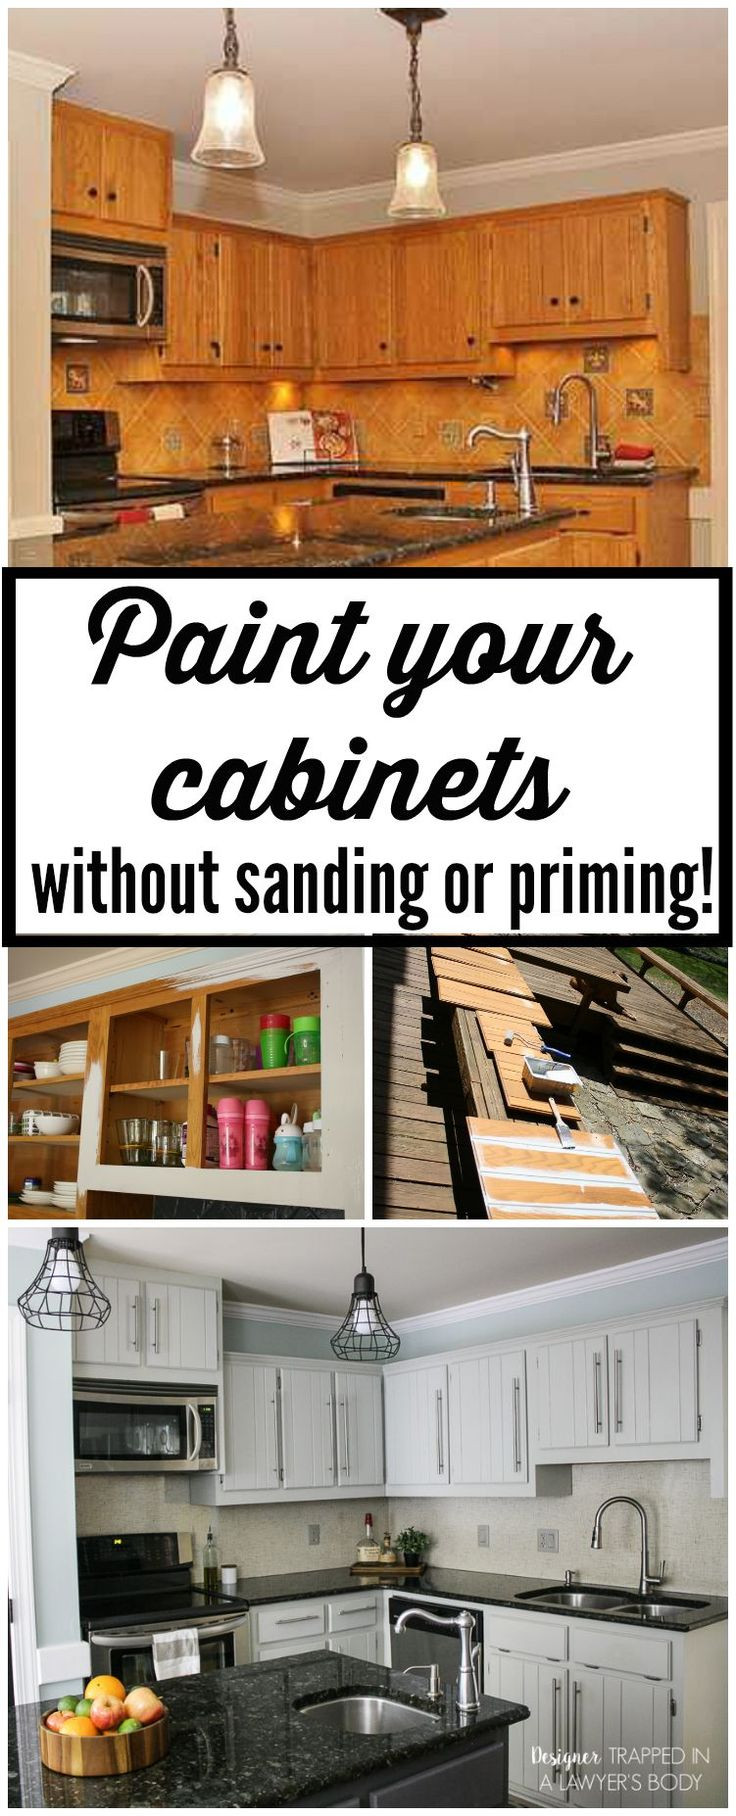 Paint Kitchen Cabinets Without Sanding
 How to Paint Kitchen Cabinets without sanding or priming